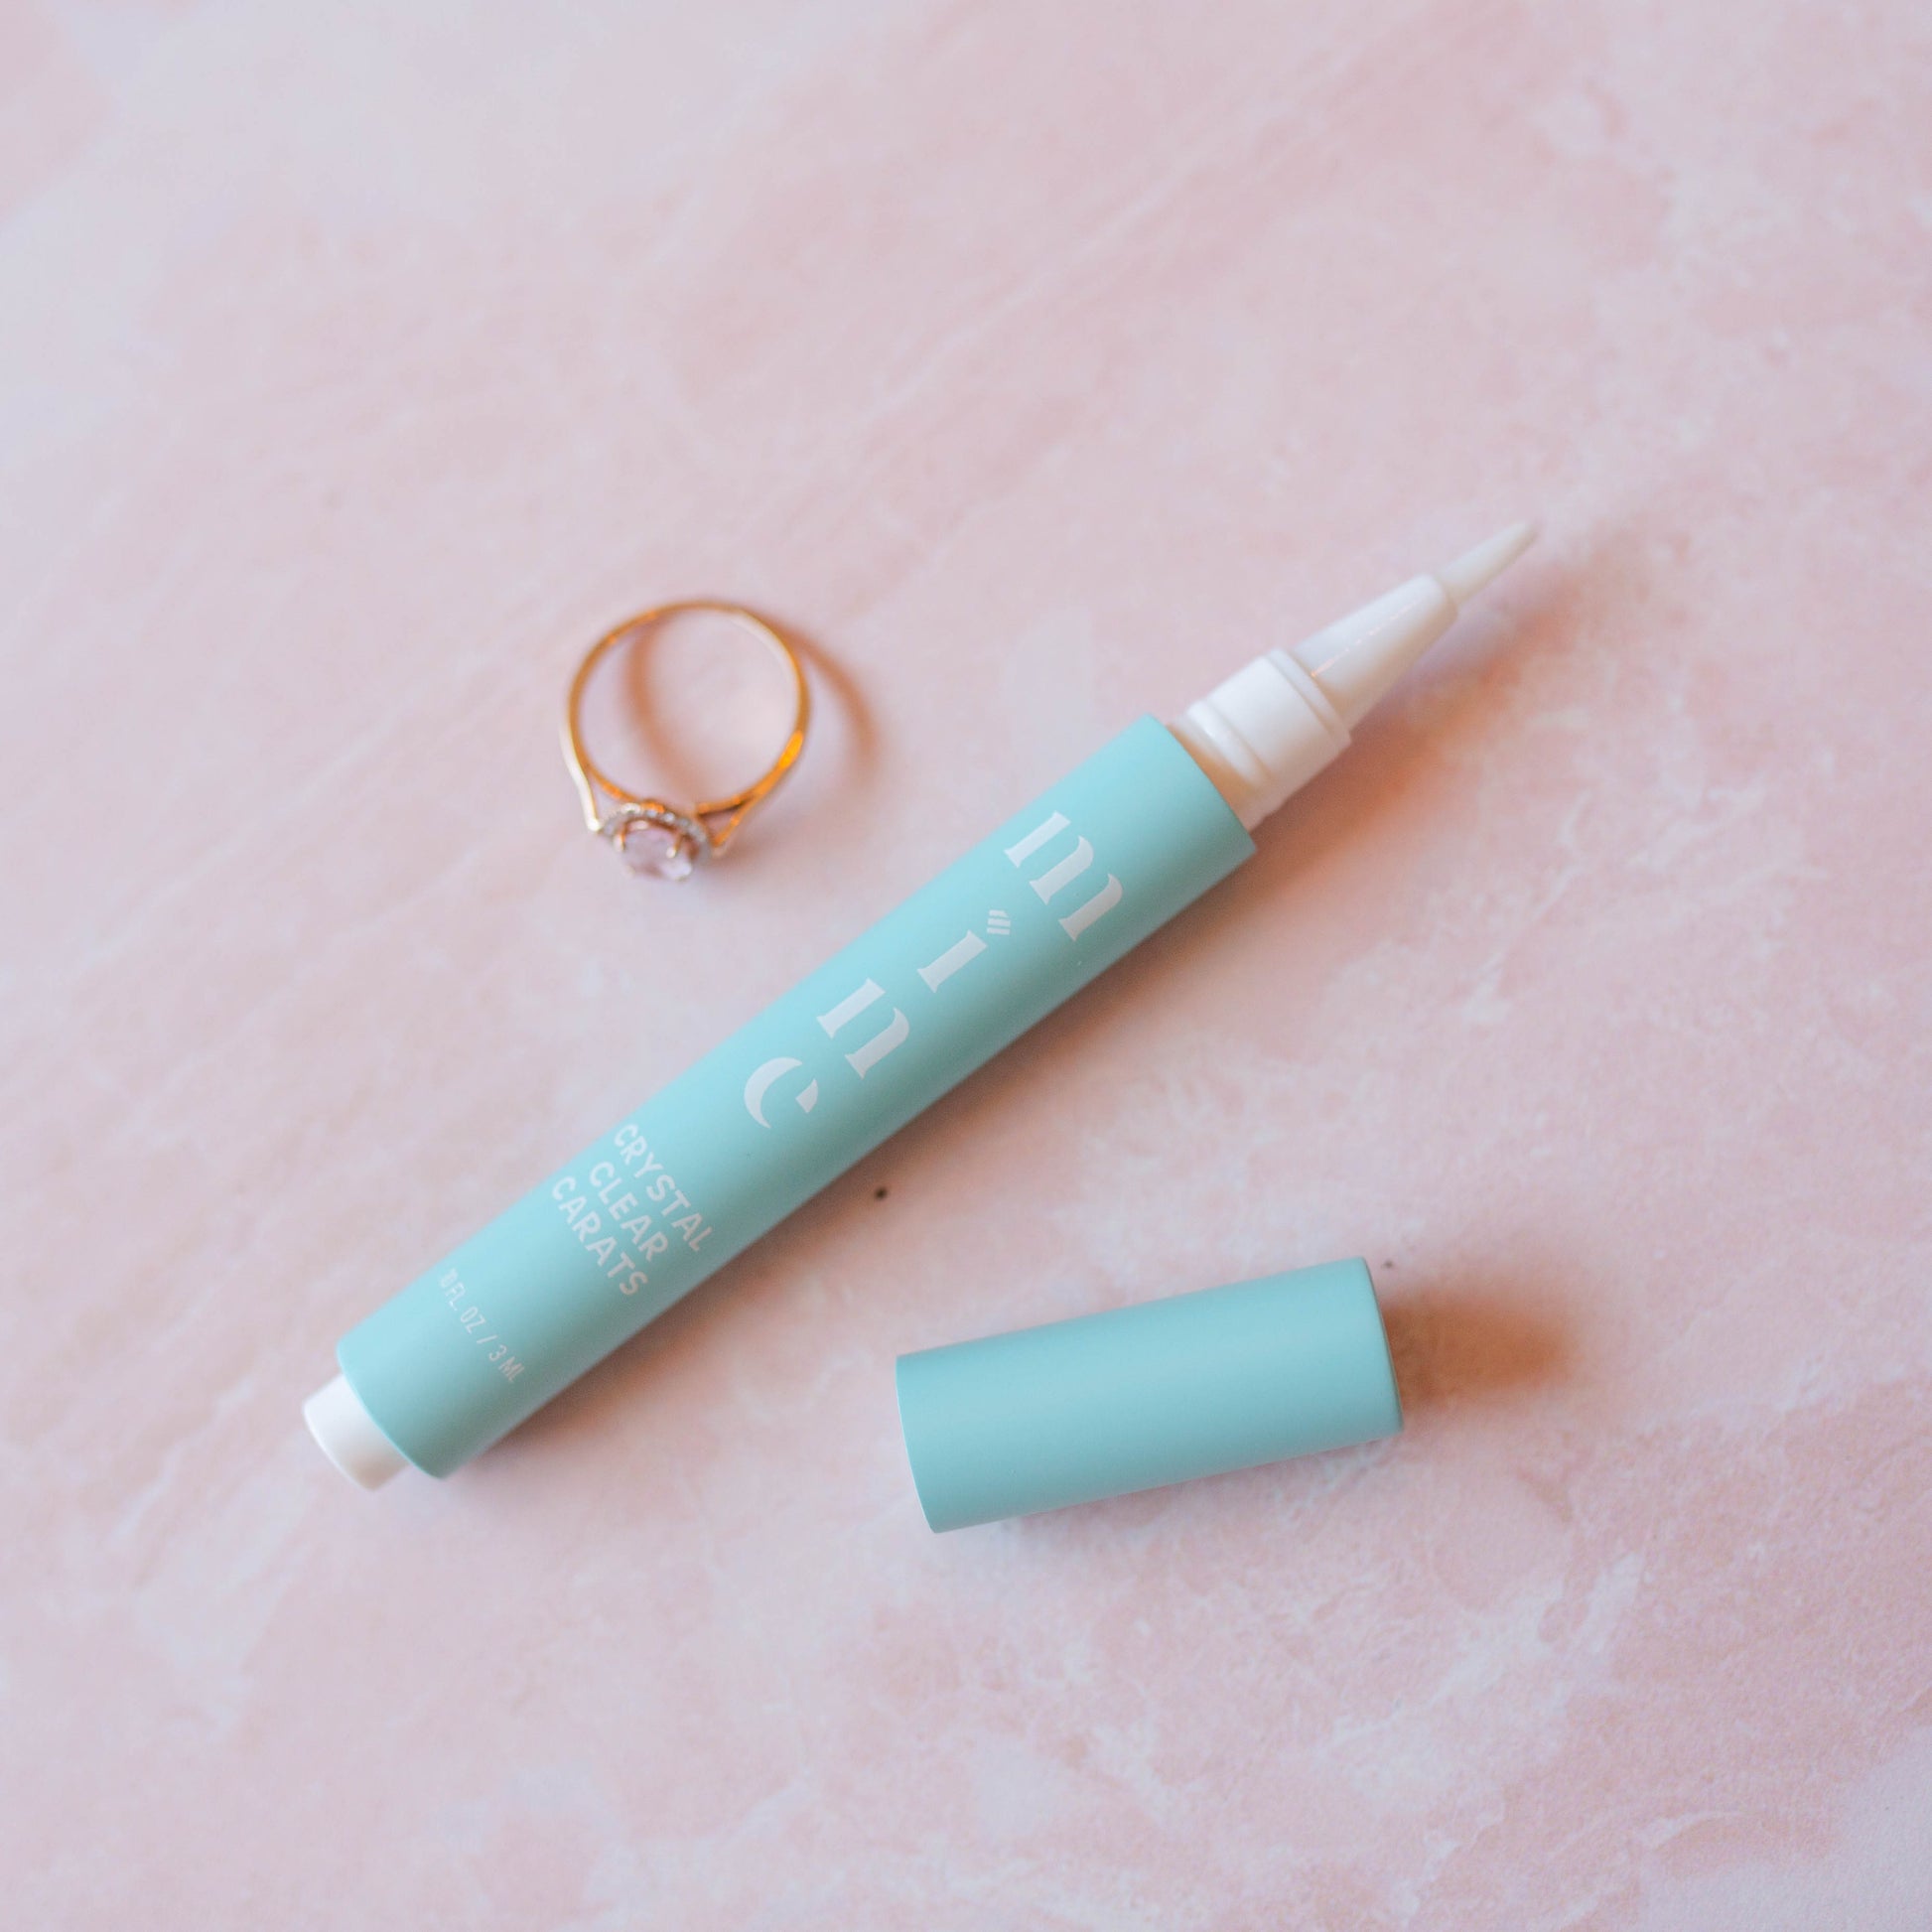 Crystal Clear Carats Ring and Jewelry Cleaner Pen - The Mine Co